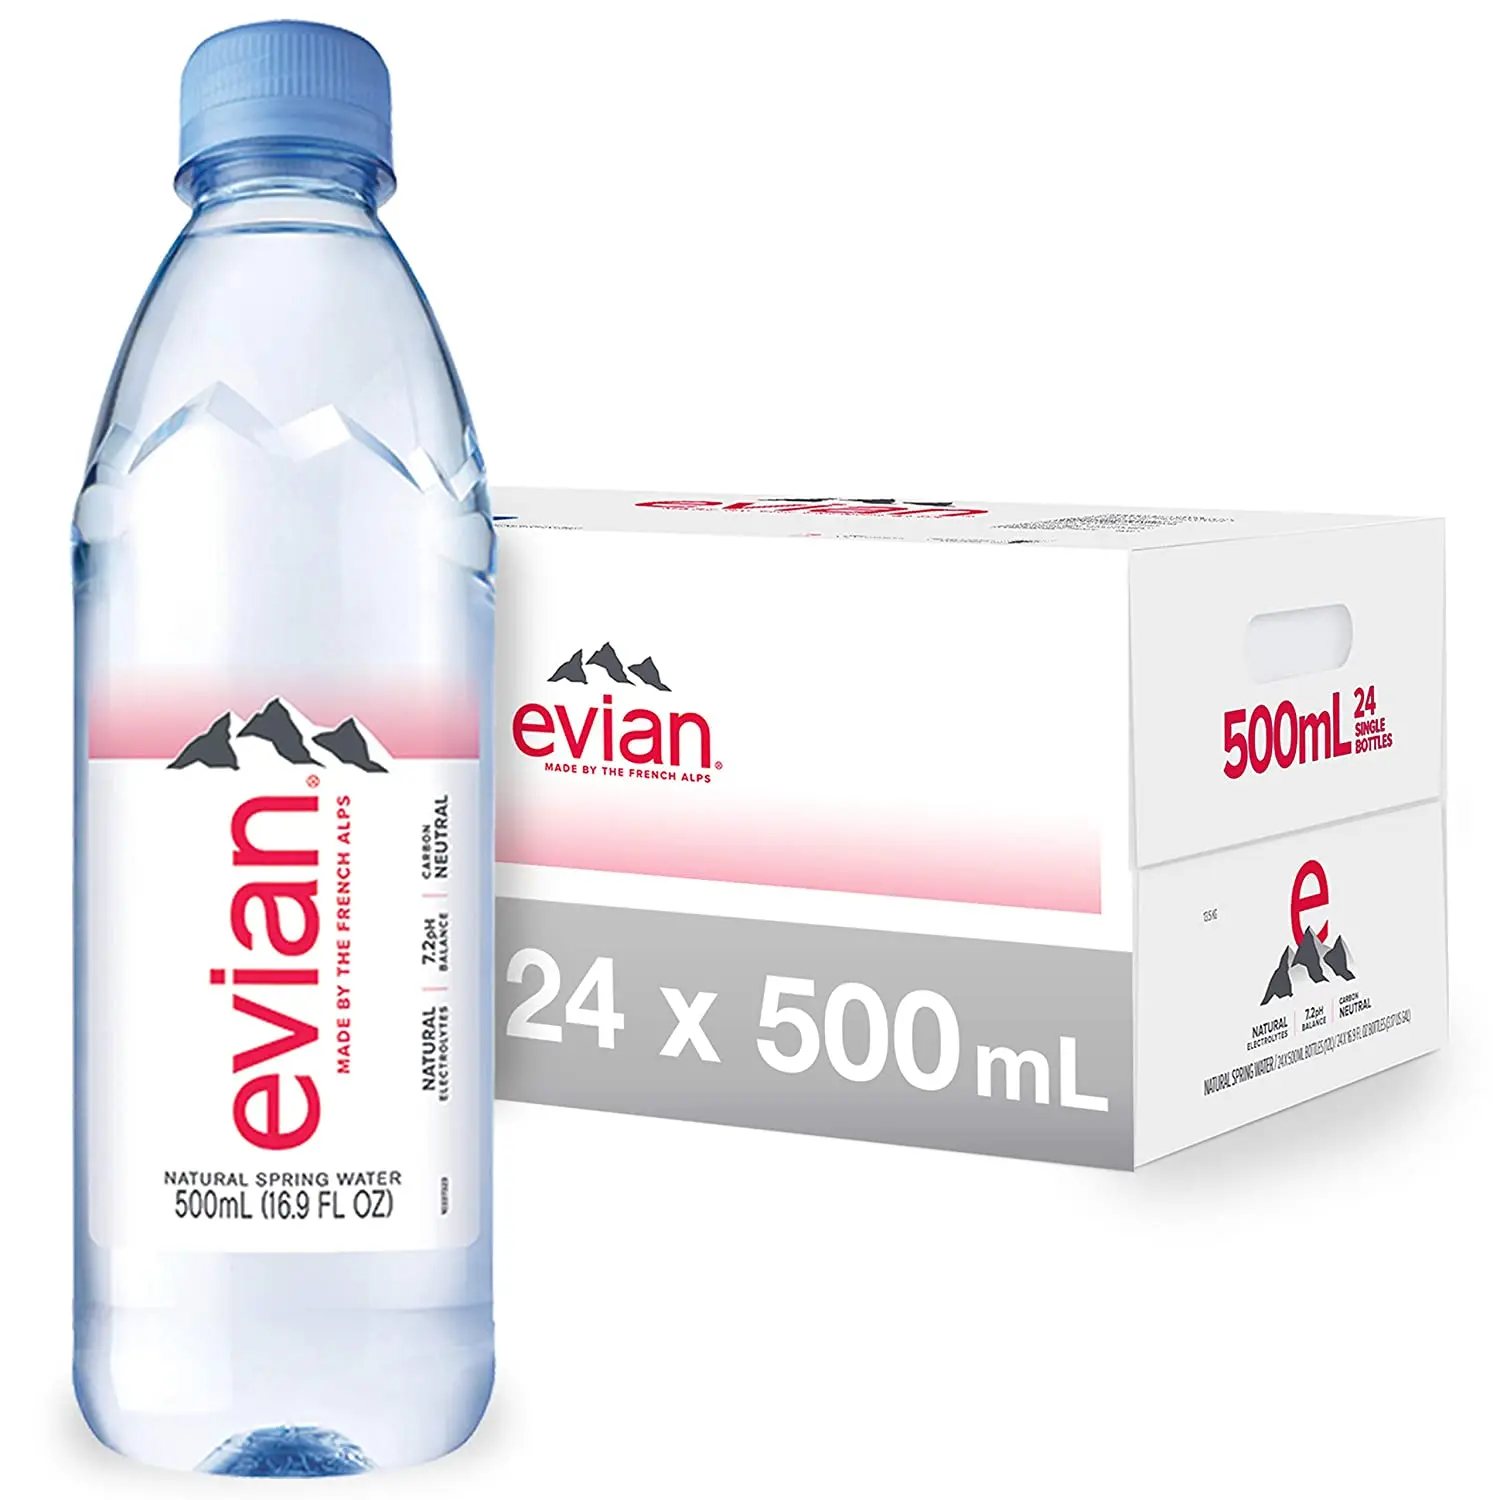 Evian Mineral Natural Spring Water Wholesale Suppliers Buy Evian Natural Mineral Water Unlabeled Bottled Water Natural Alkaline Spring Water Product On Alibaba Com